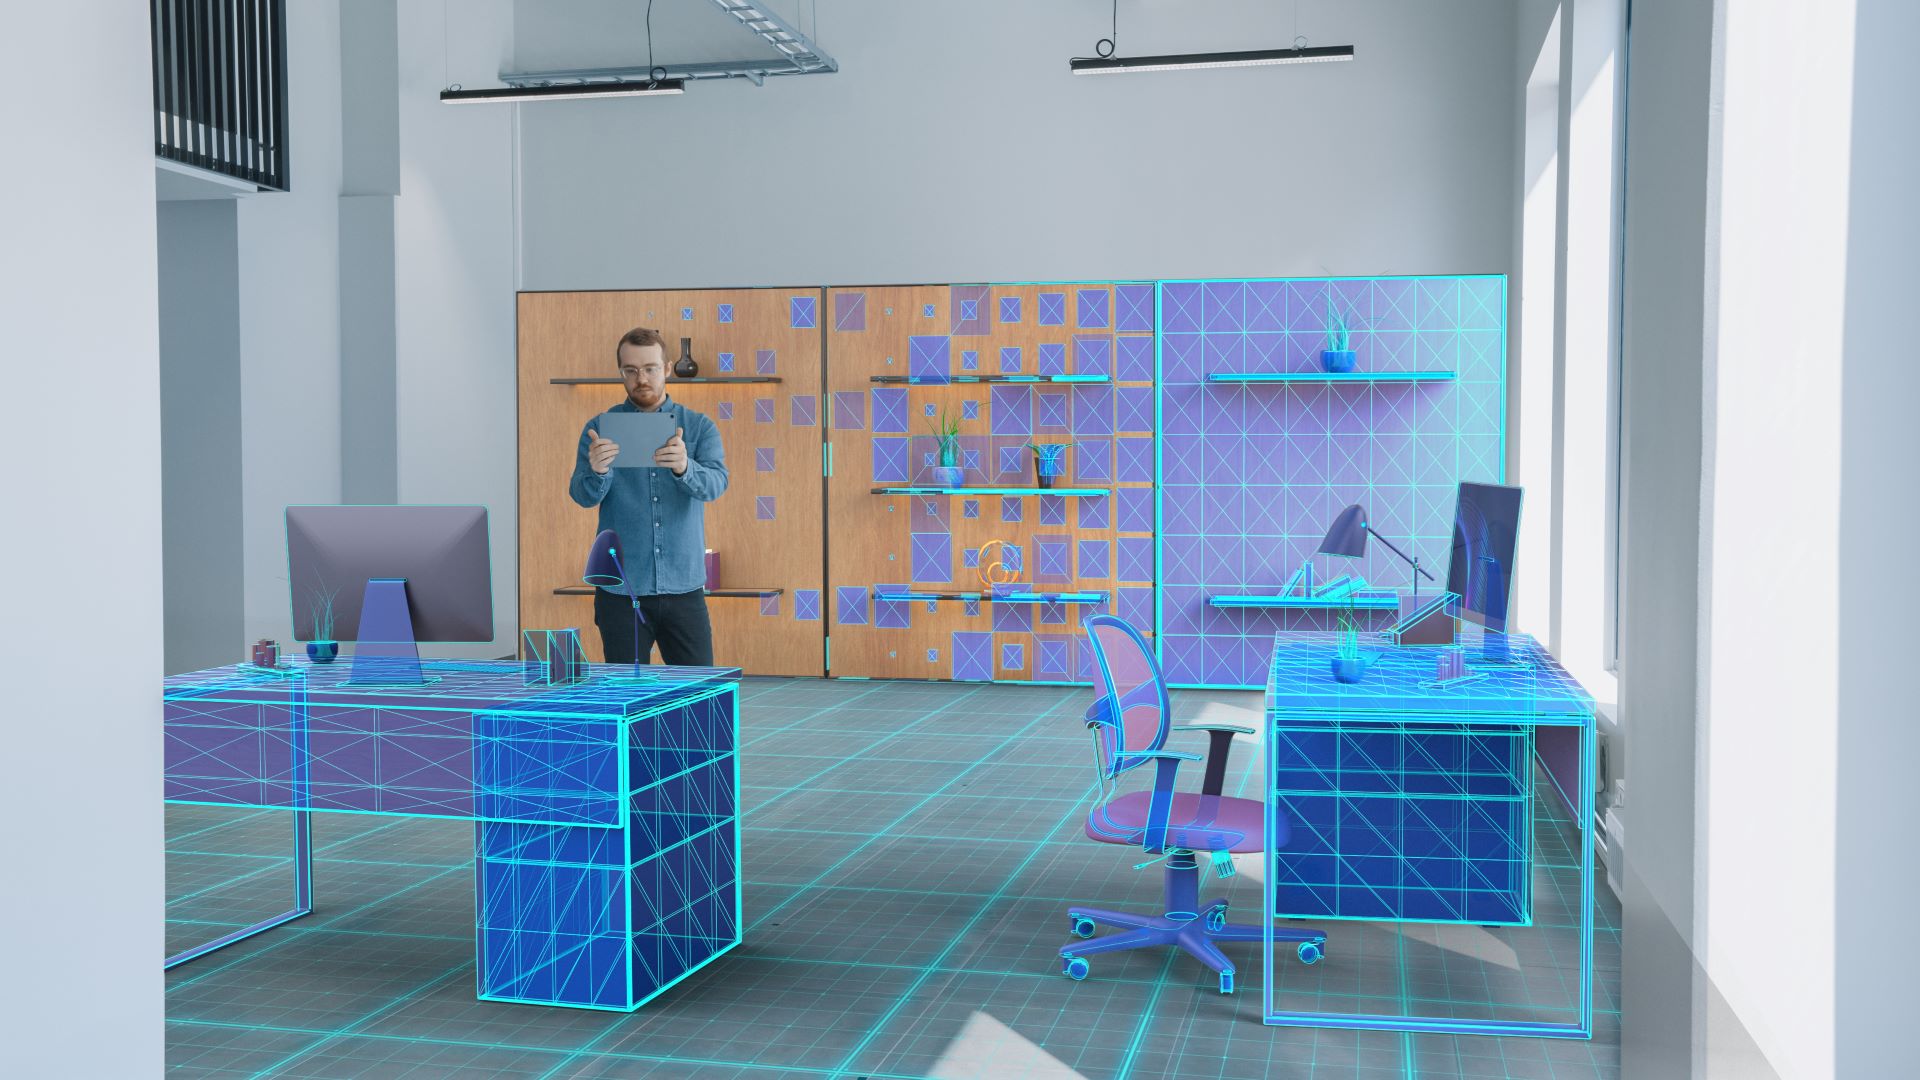 complete room viewed in augmented reality with man standing in the middle